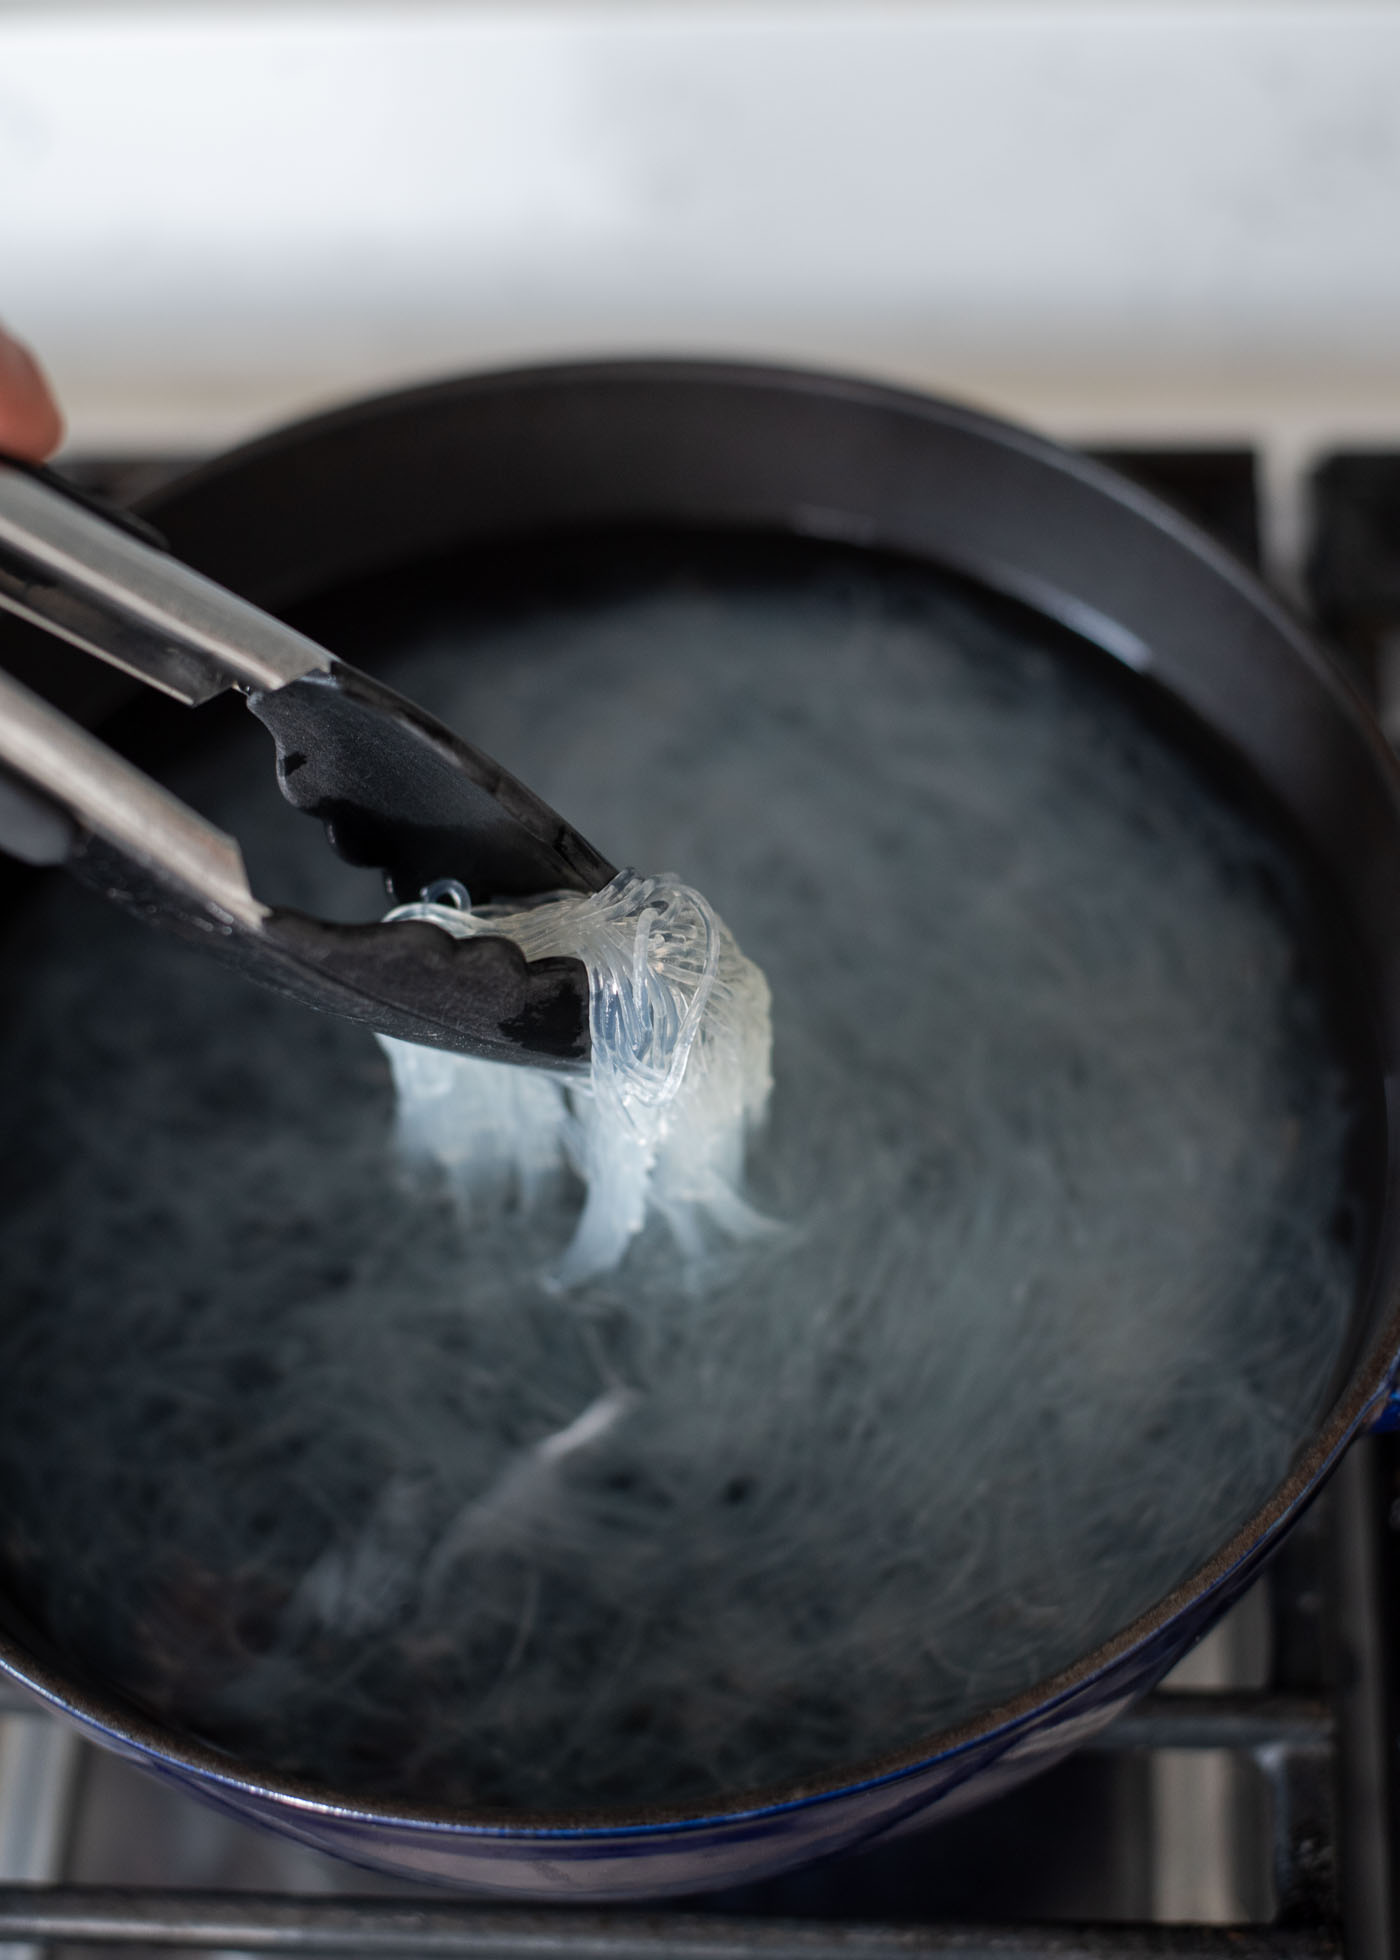 Kitchen tongs are picking up cooked white glass noodles from the simmering water.